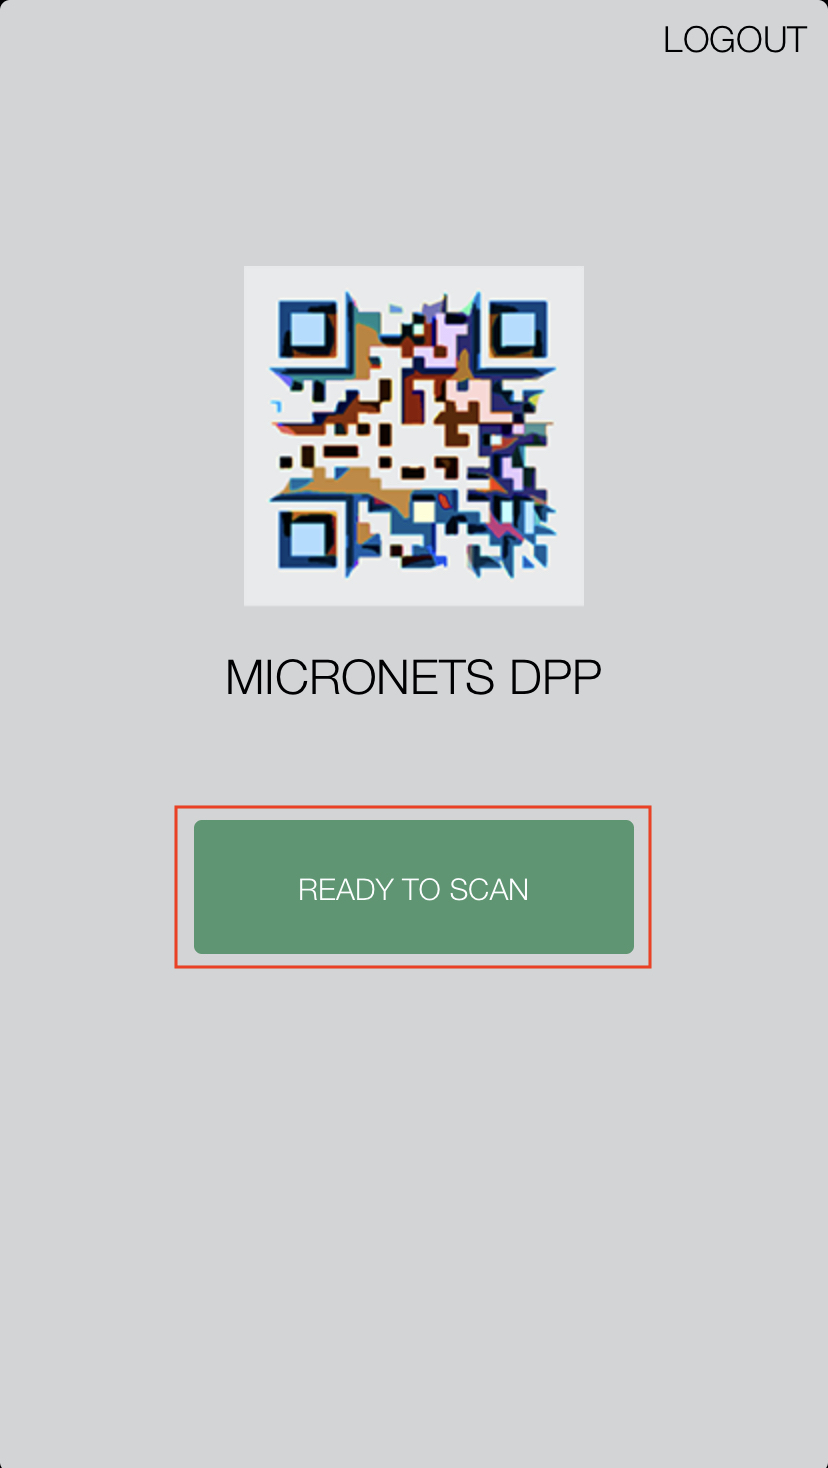 A screenshot of the micronets mobile application with the ready to scan button enclosed in a red box, which is to be clicked.